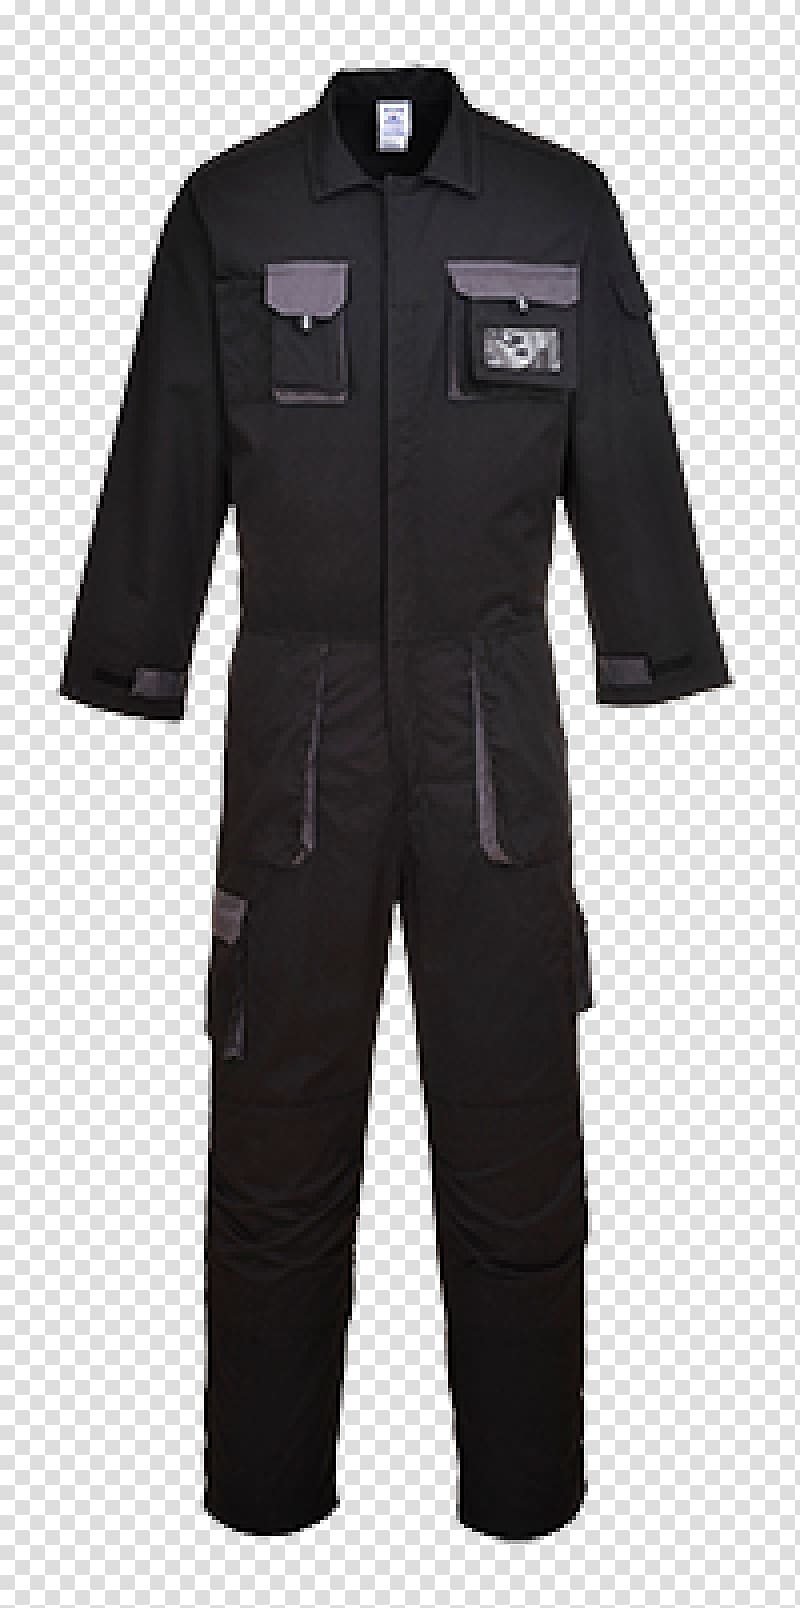 Workwear Boilersuit Overall Clothing Portwest, suit transparent ...